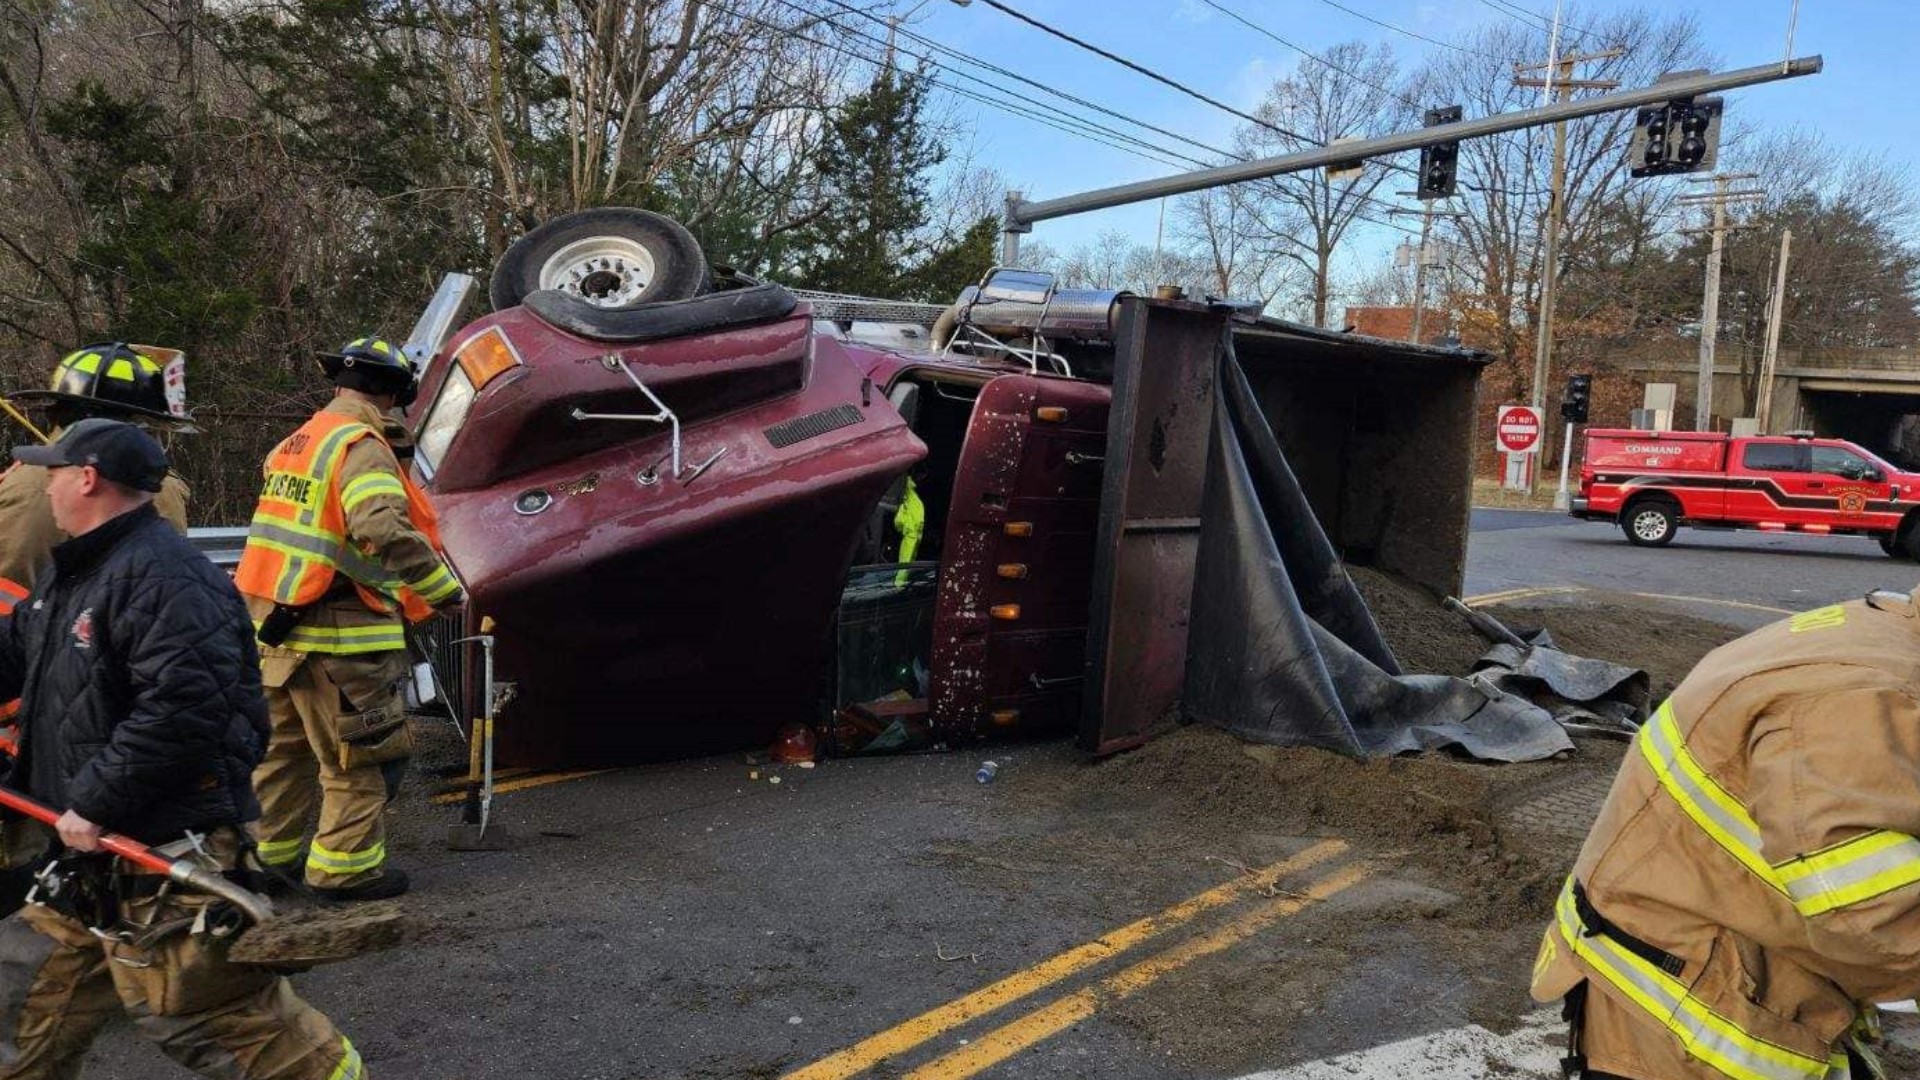 A dump truck carrying a full load of sand rolled over on Schoolhouse Road near Interstate 95 exit 35 in Milford.